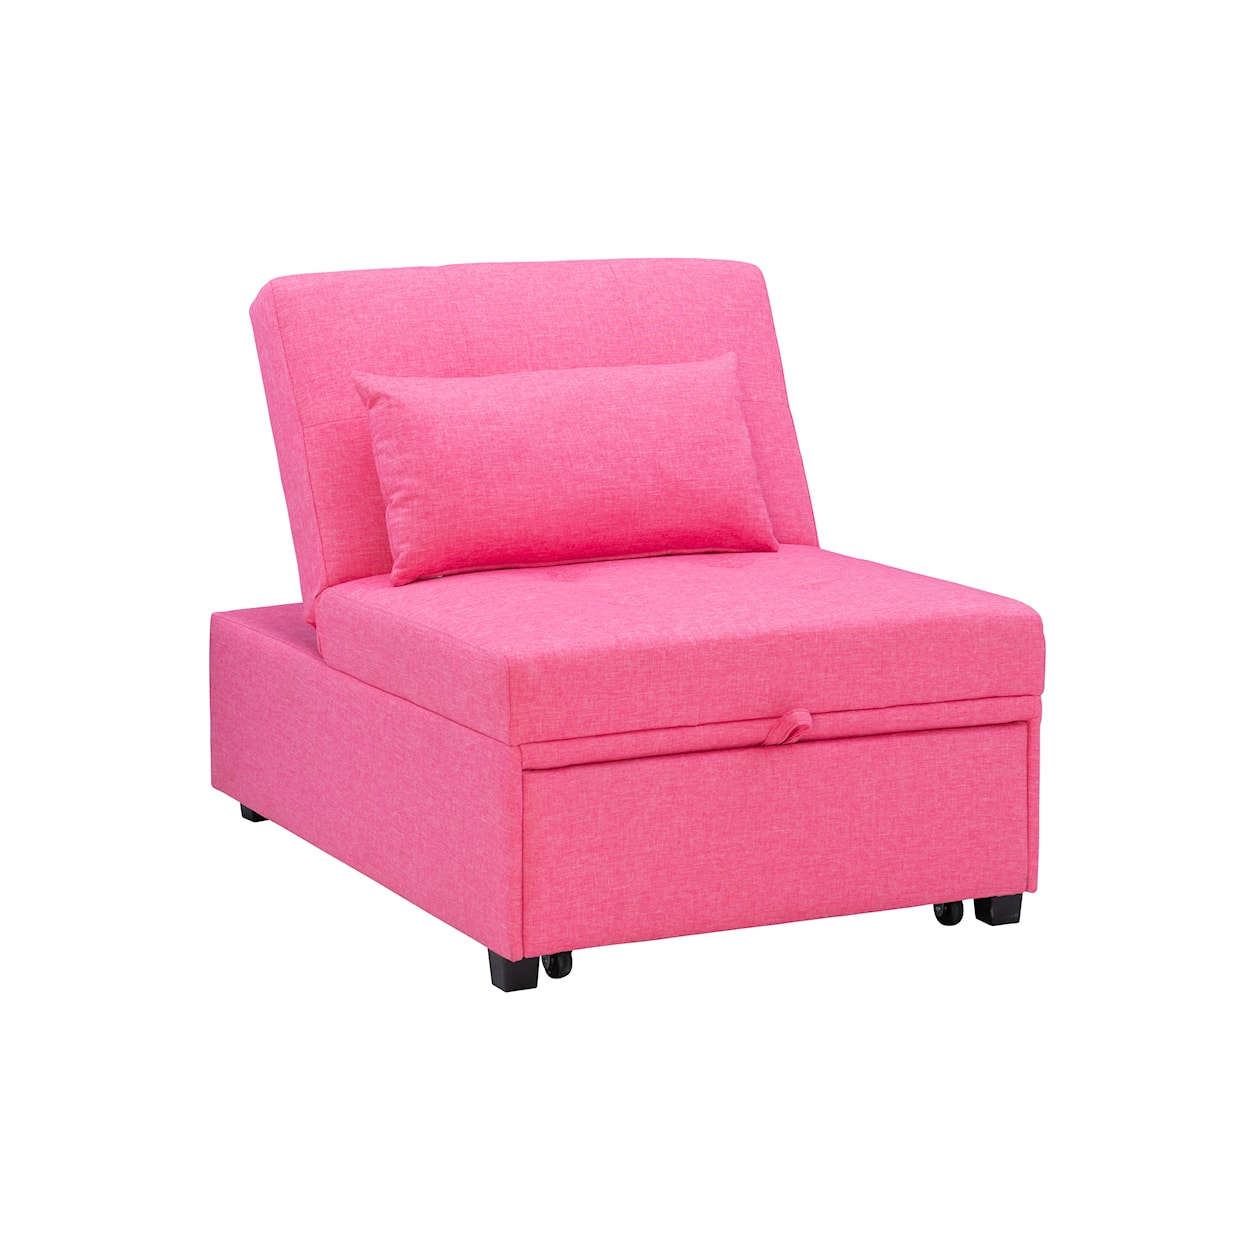 Powell Boone Sofa Bed Hot Pink